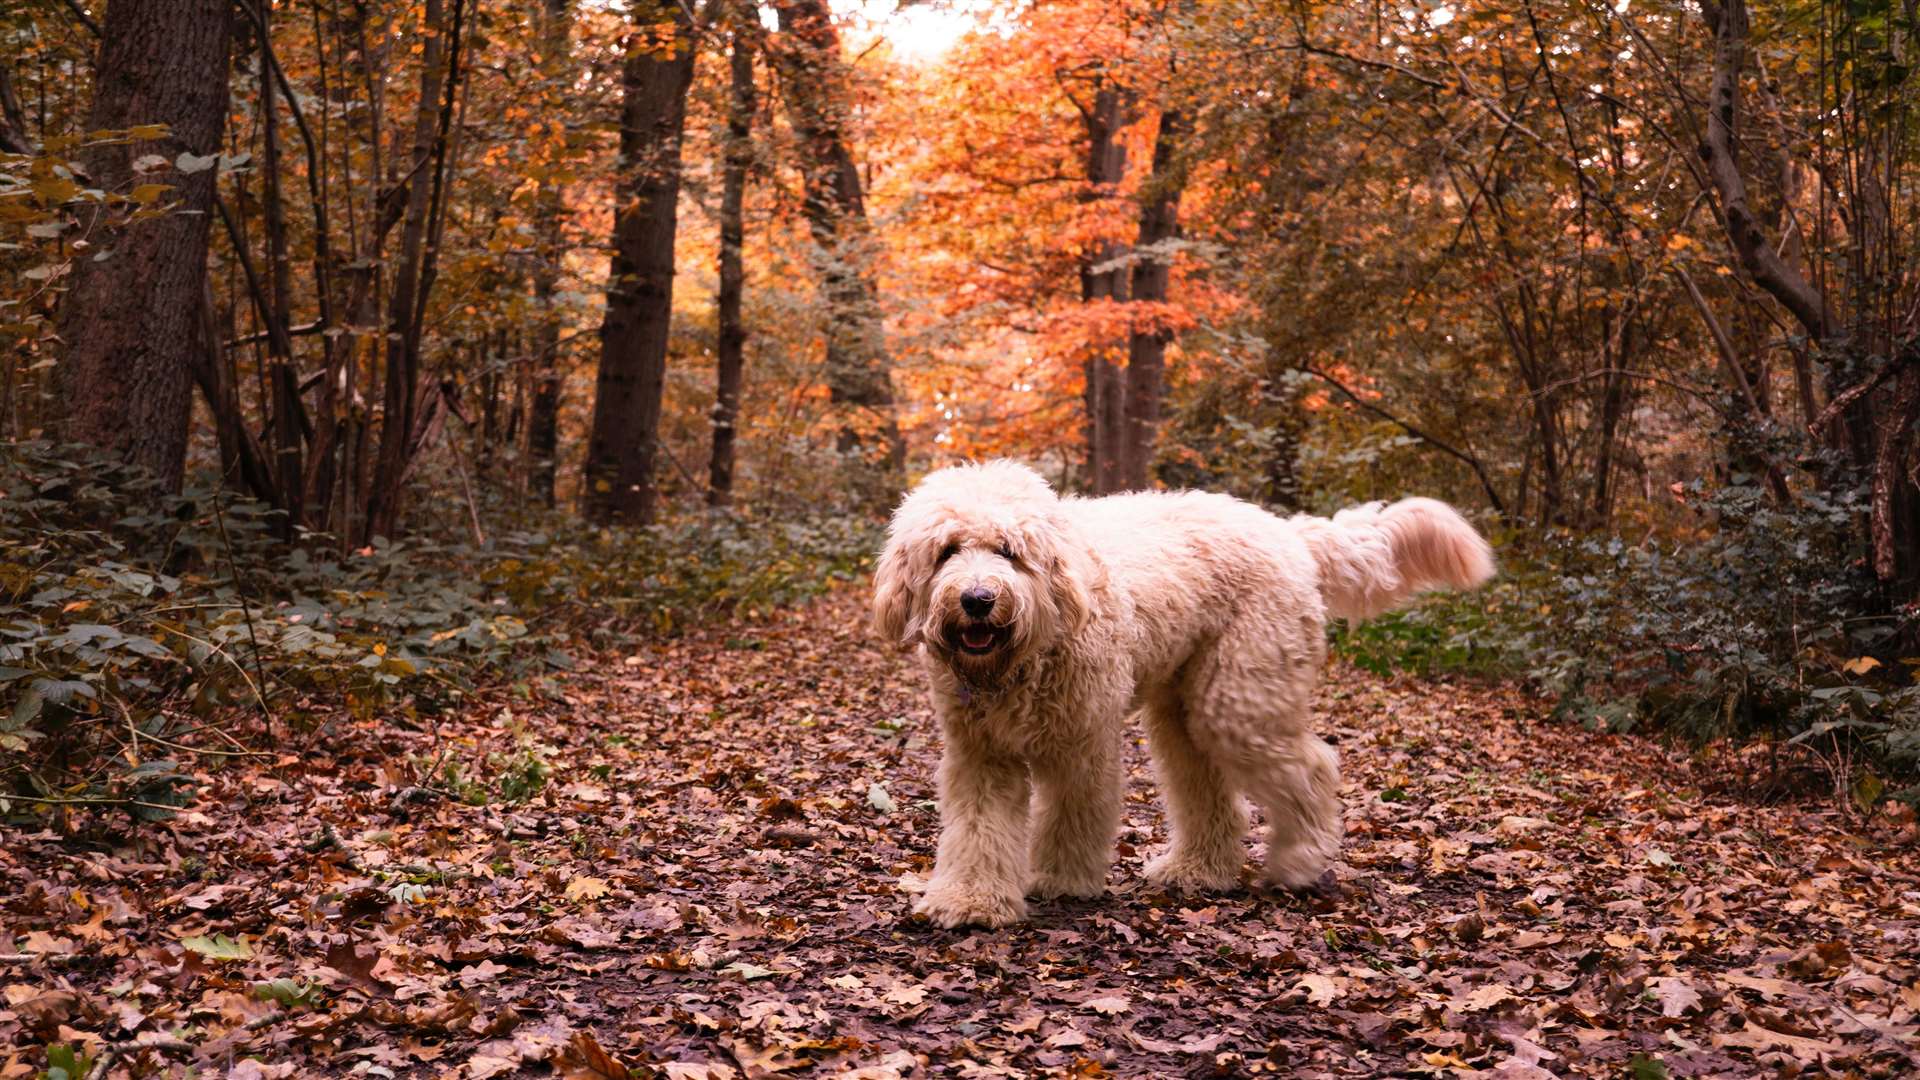 Conkers and acorns can be extremely toxic to dogs. Picture: Todd Mittens, Unsplash